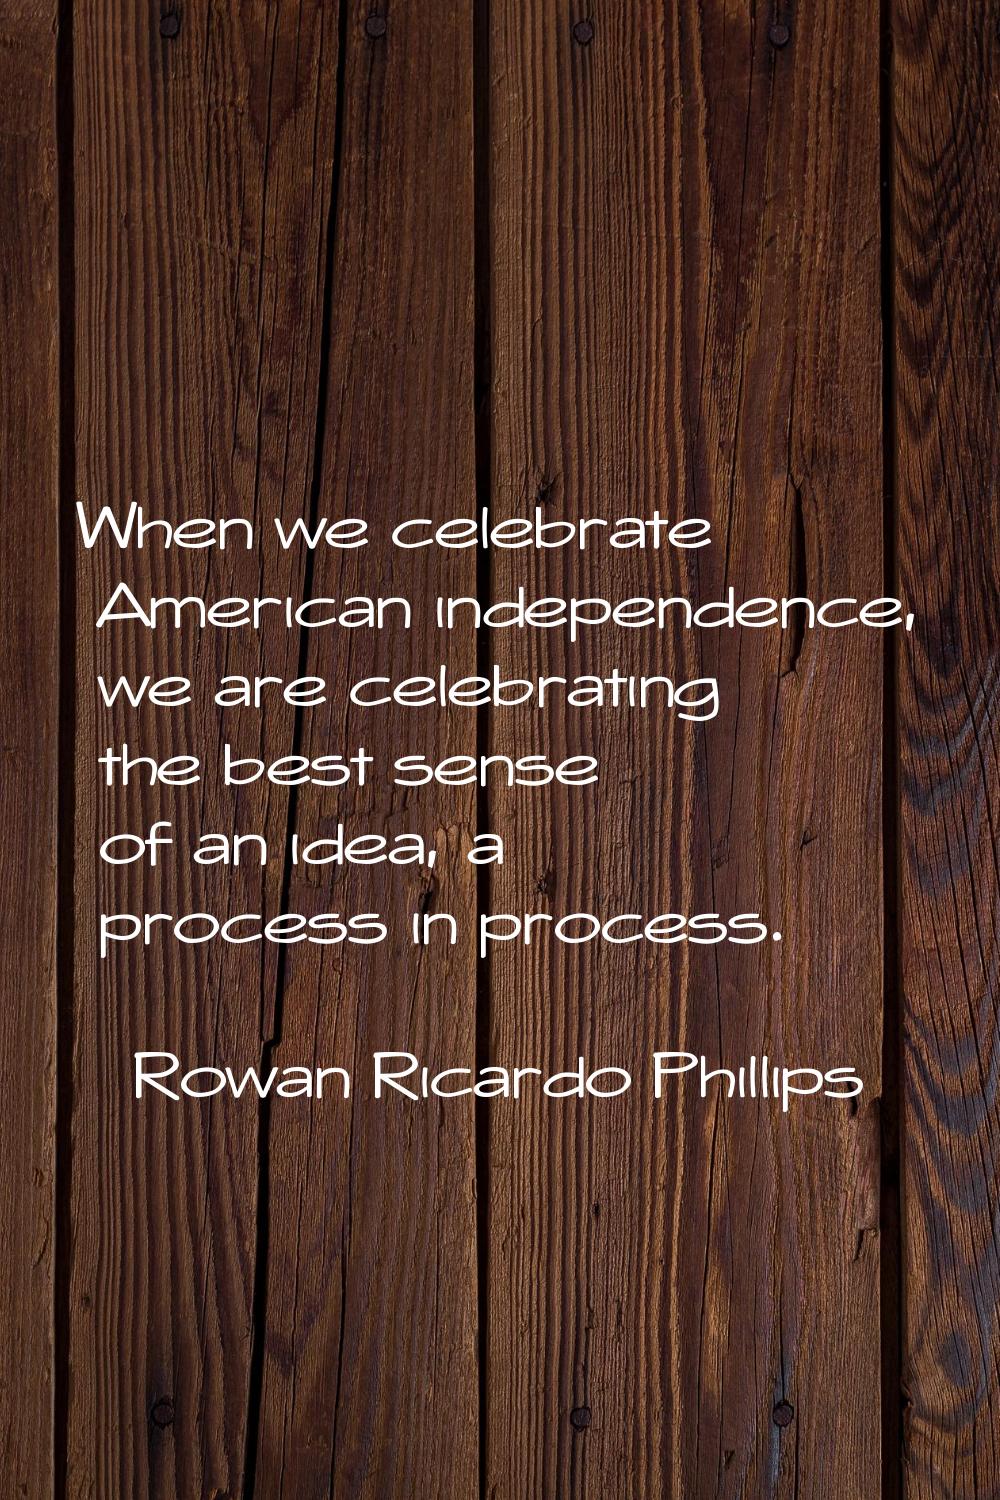 When we celebrate American independence, we are celebrating the best sense of an idea, a process in